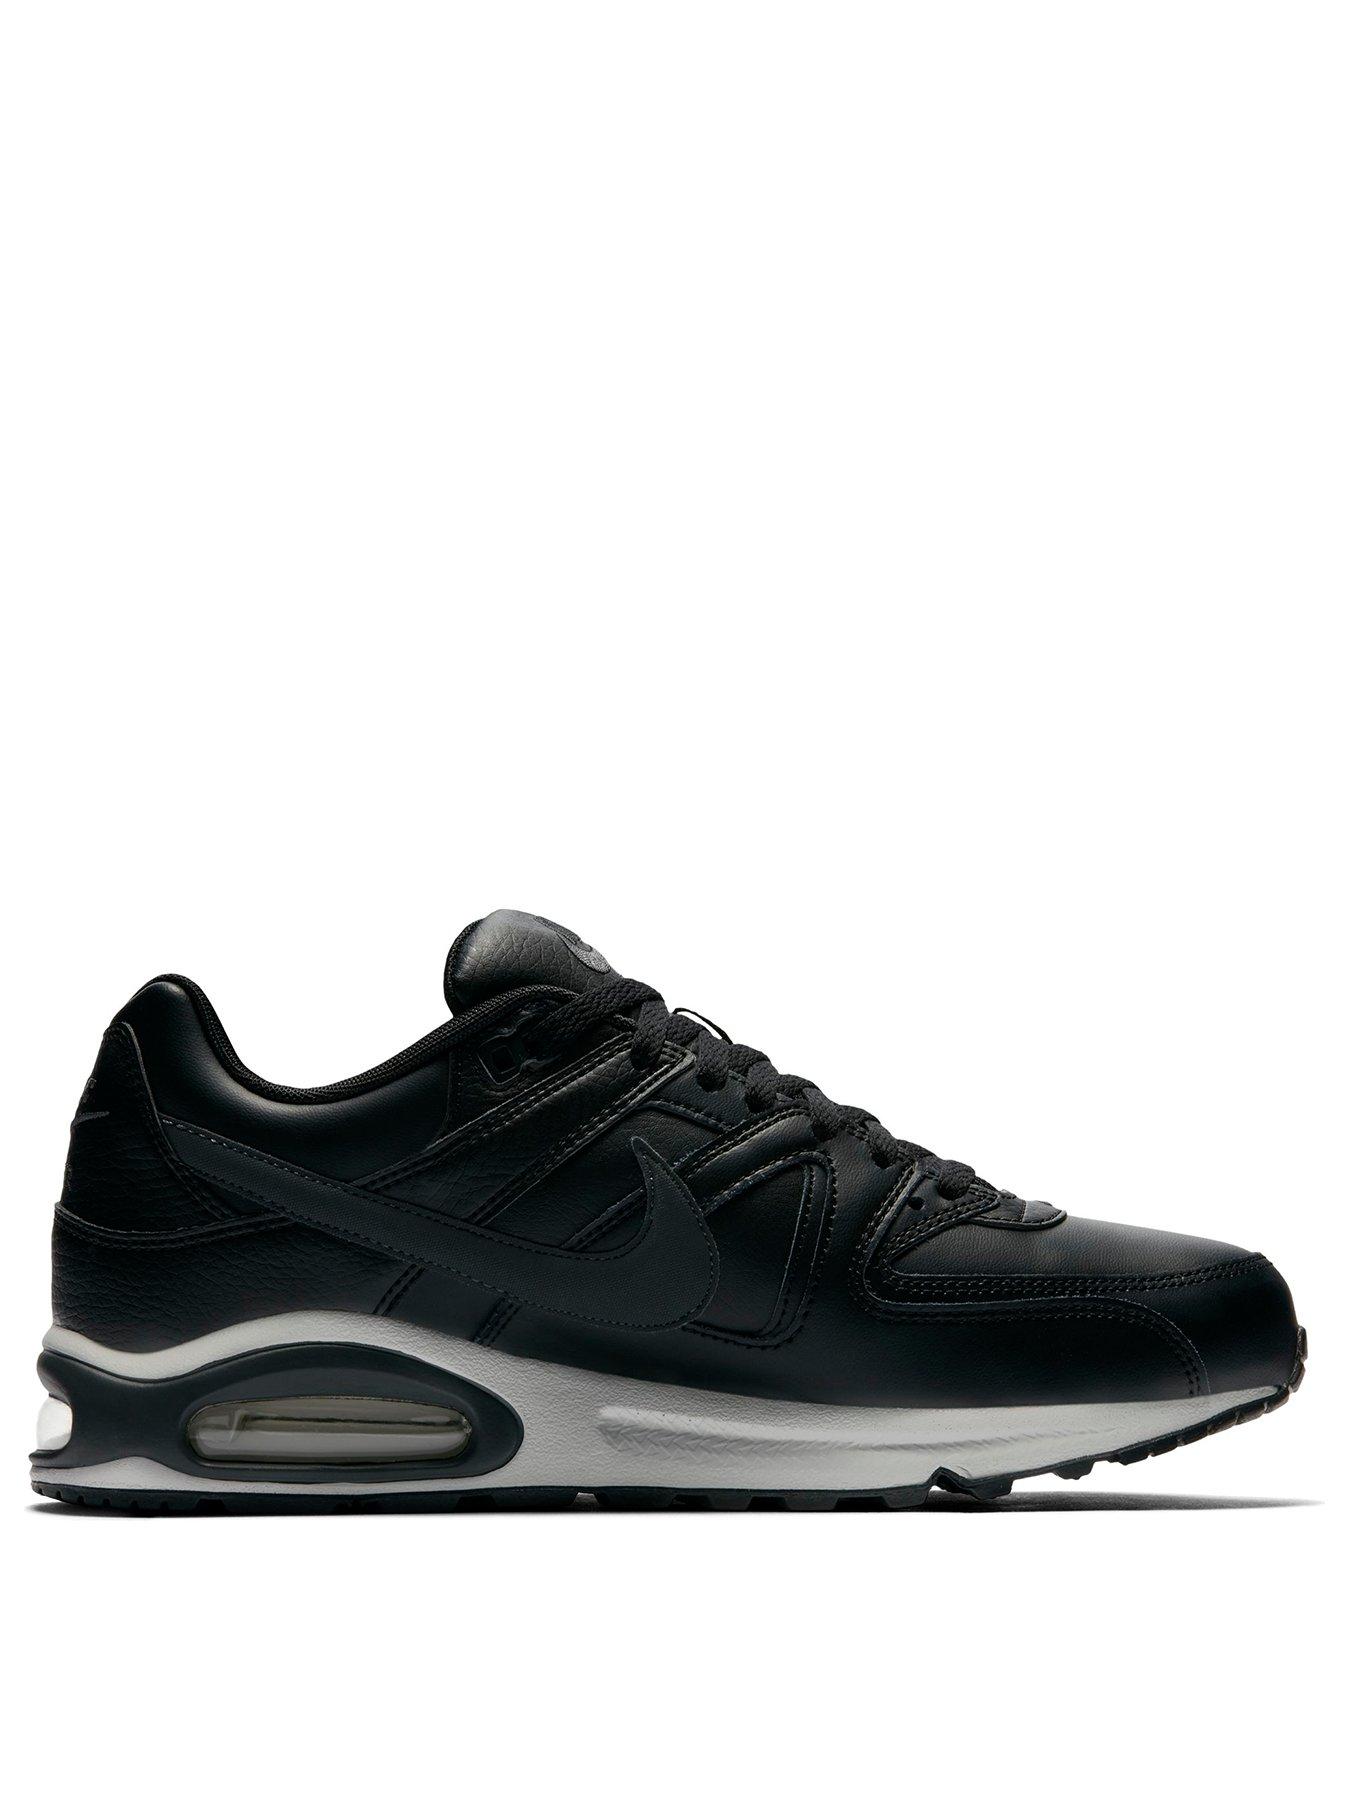 mens nike air max command leather